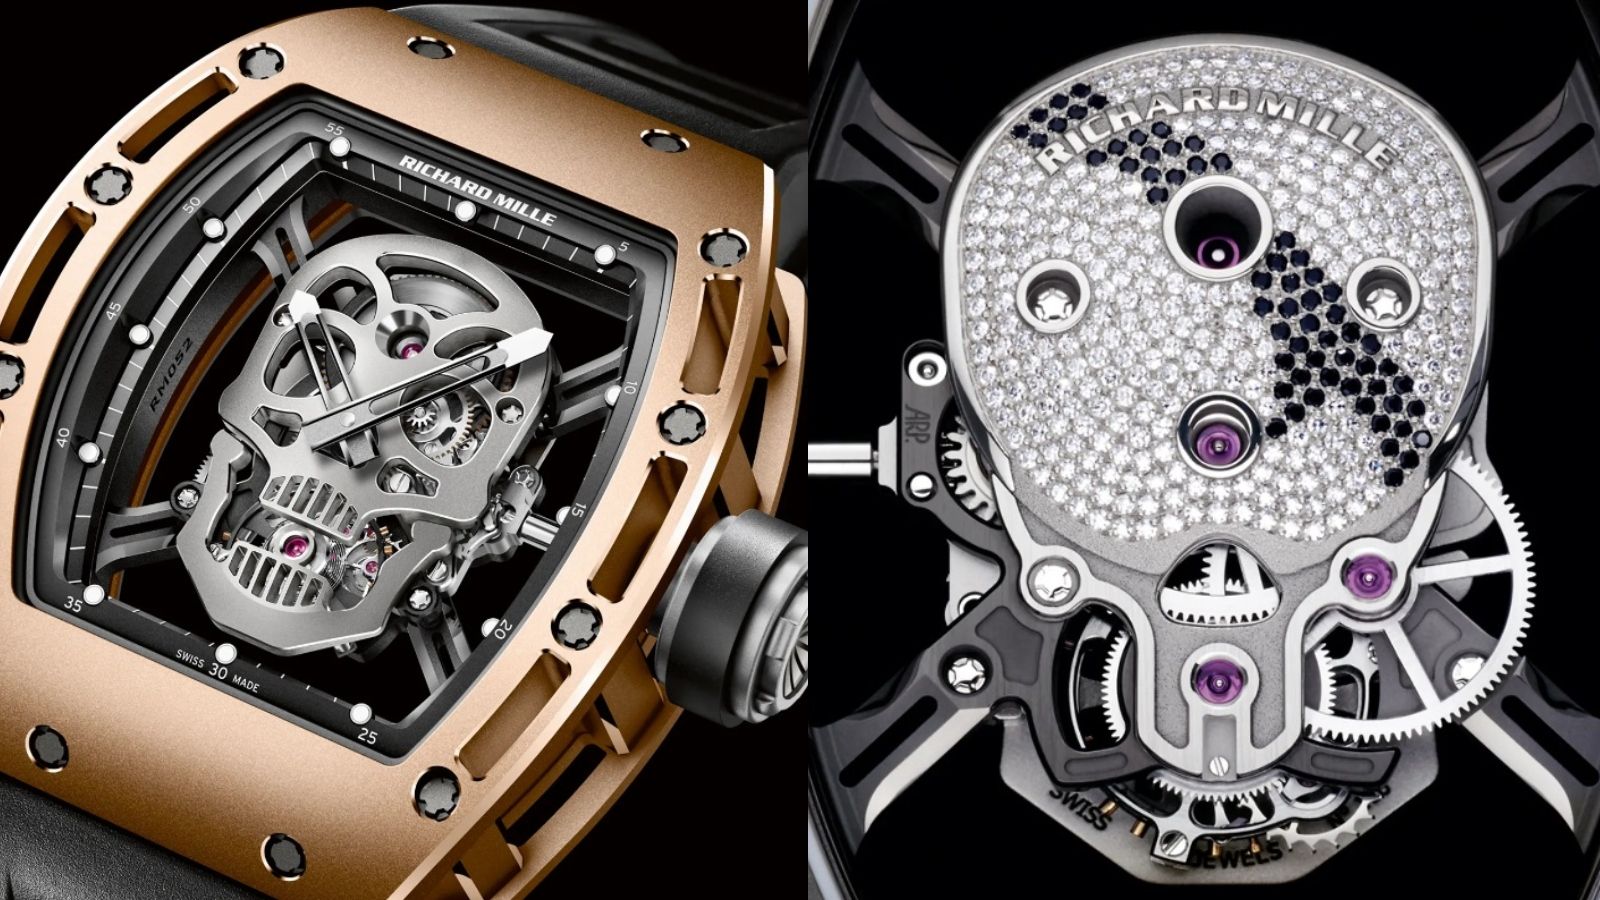 The Most Expensive Richard Mille Wristwatches of All Time